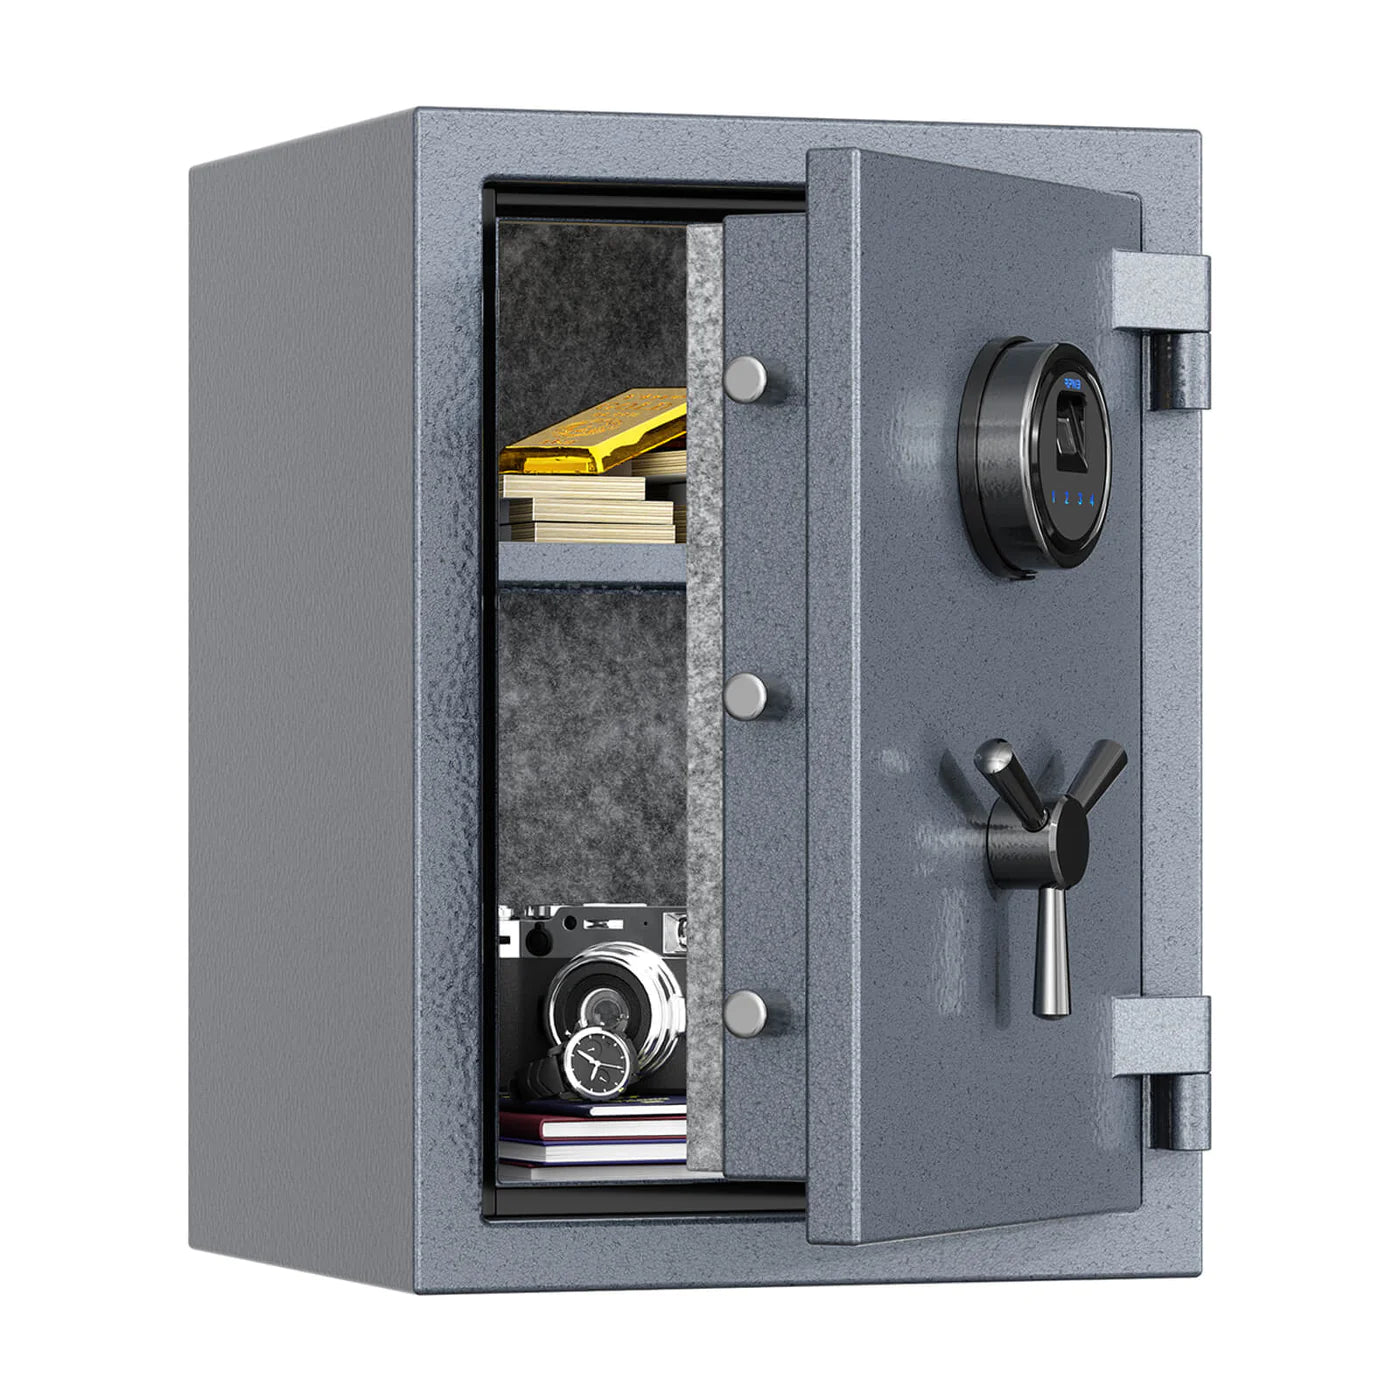 RPNB RPFS50G Grey High Capacity Biometric Fireproof Safe with Touch Screen Keypad